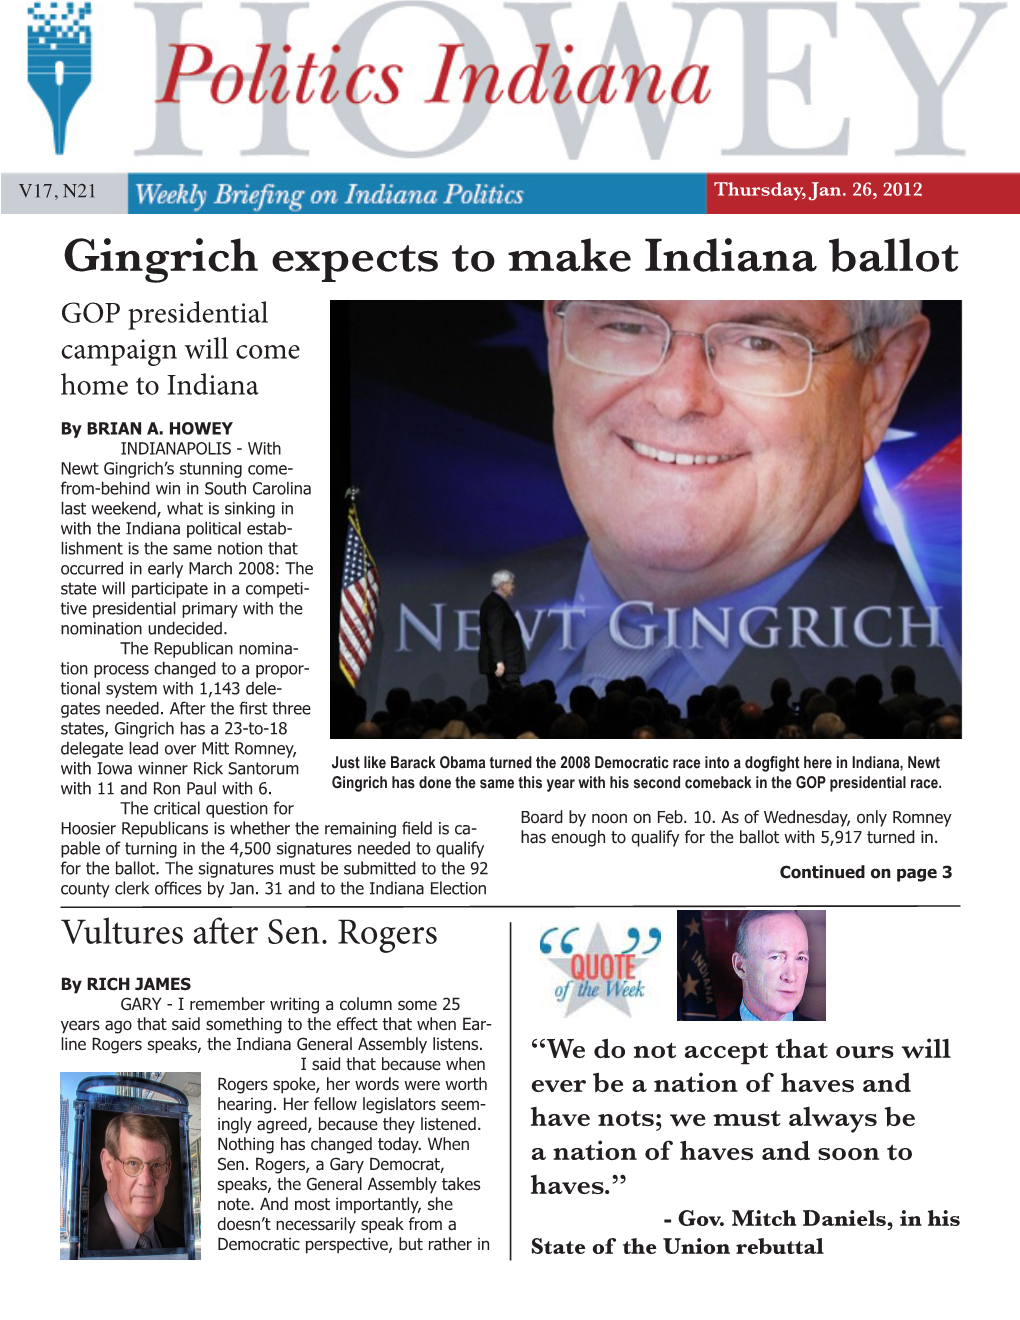 Gingrich Expects to Make Indiana Ballot GOP Presidential Campaign Will Come Home to Indiana by BRIAN A